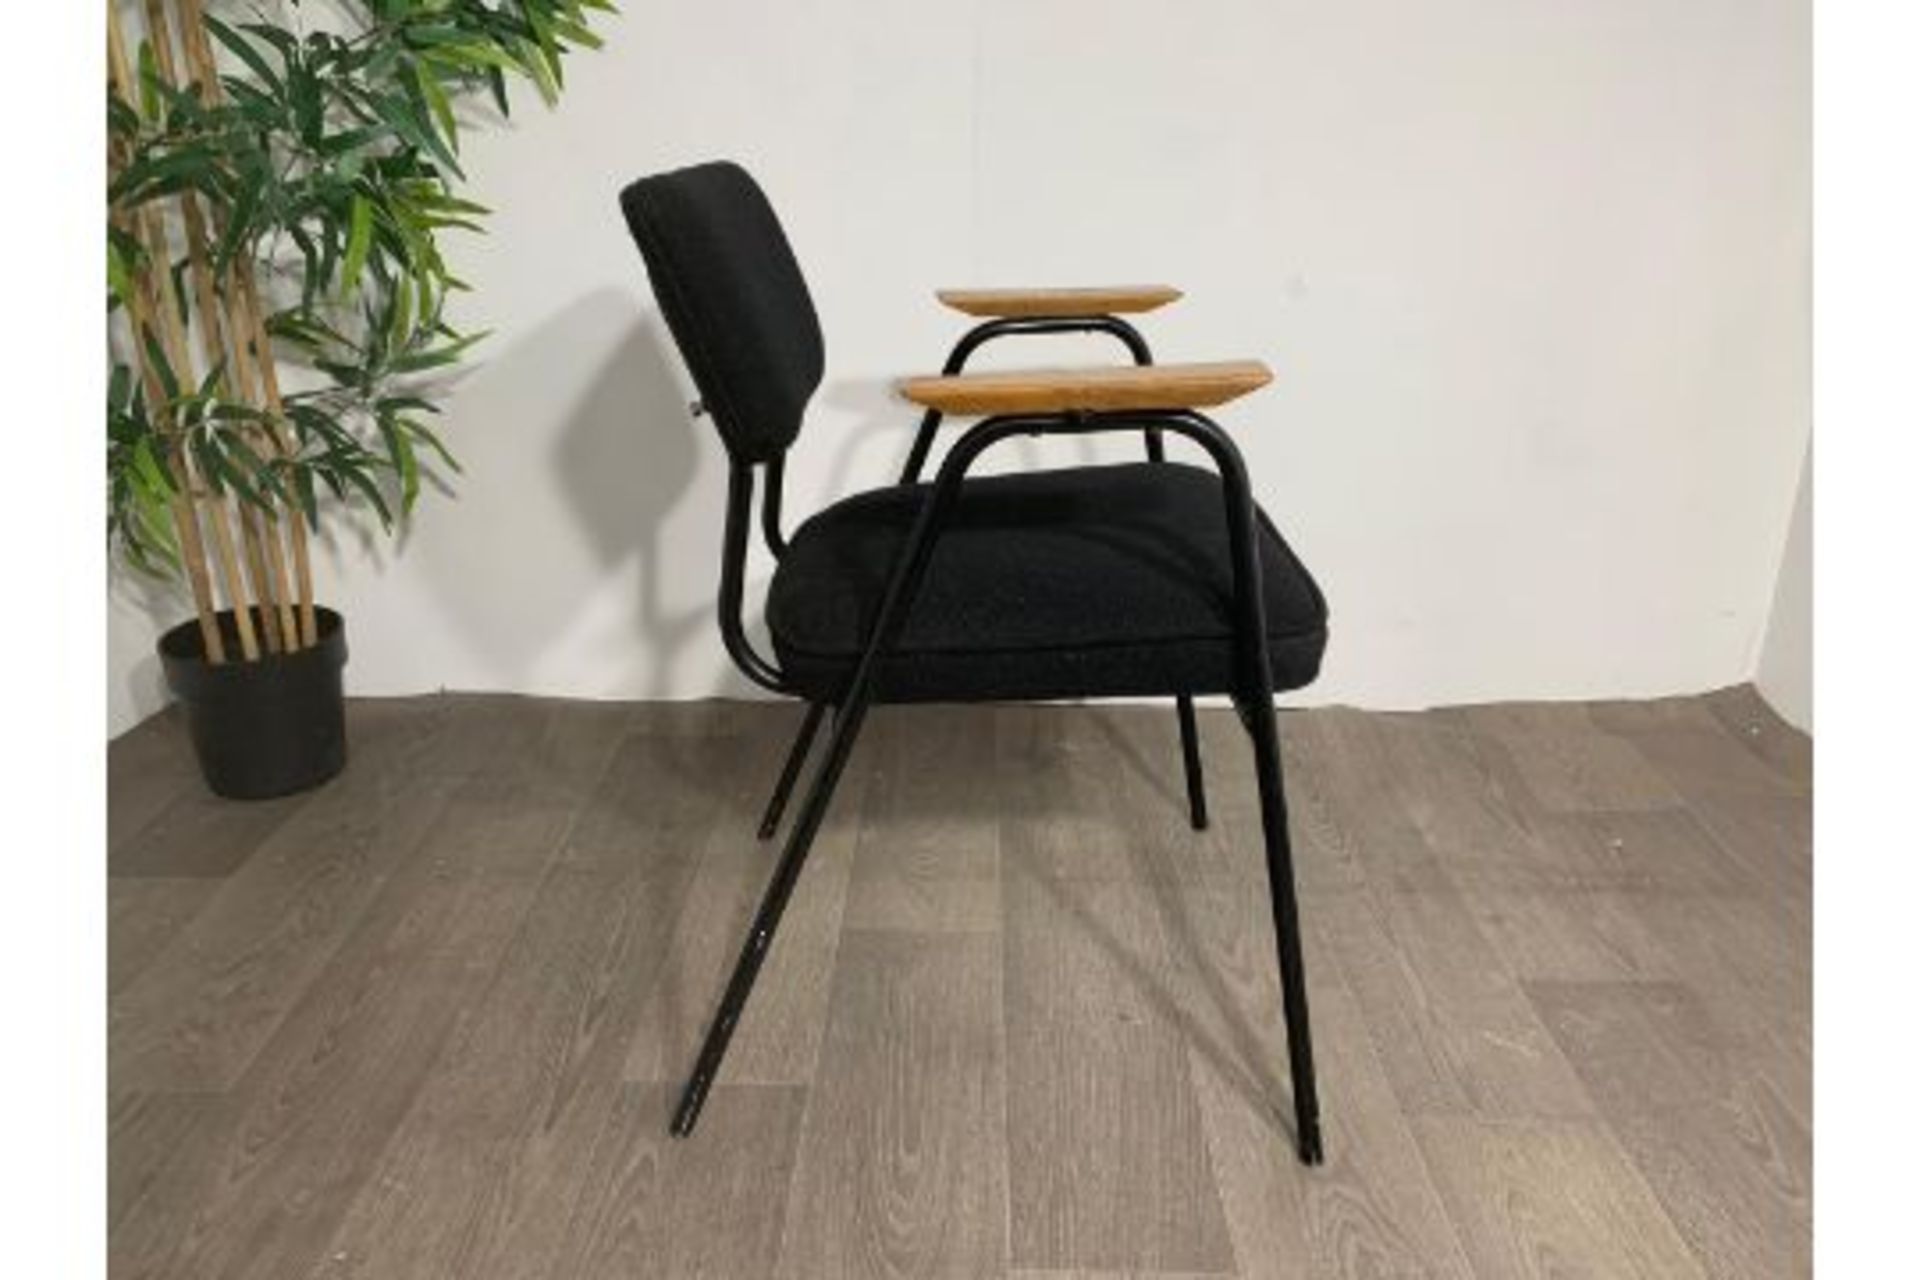 Black Commercial Grade Chair with Wooden Arm Rest x2 - Image 2 of 5